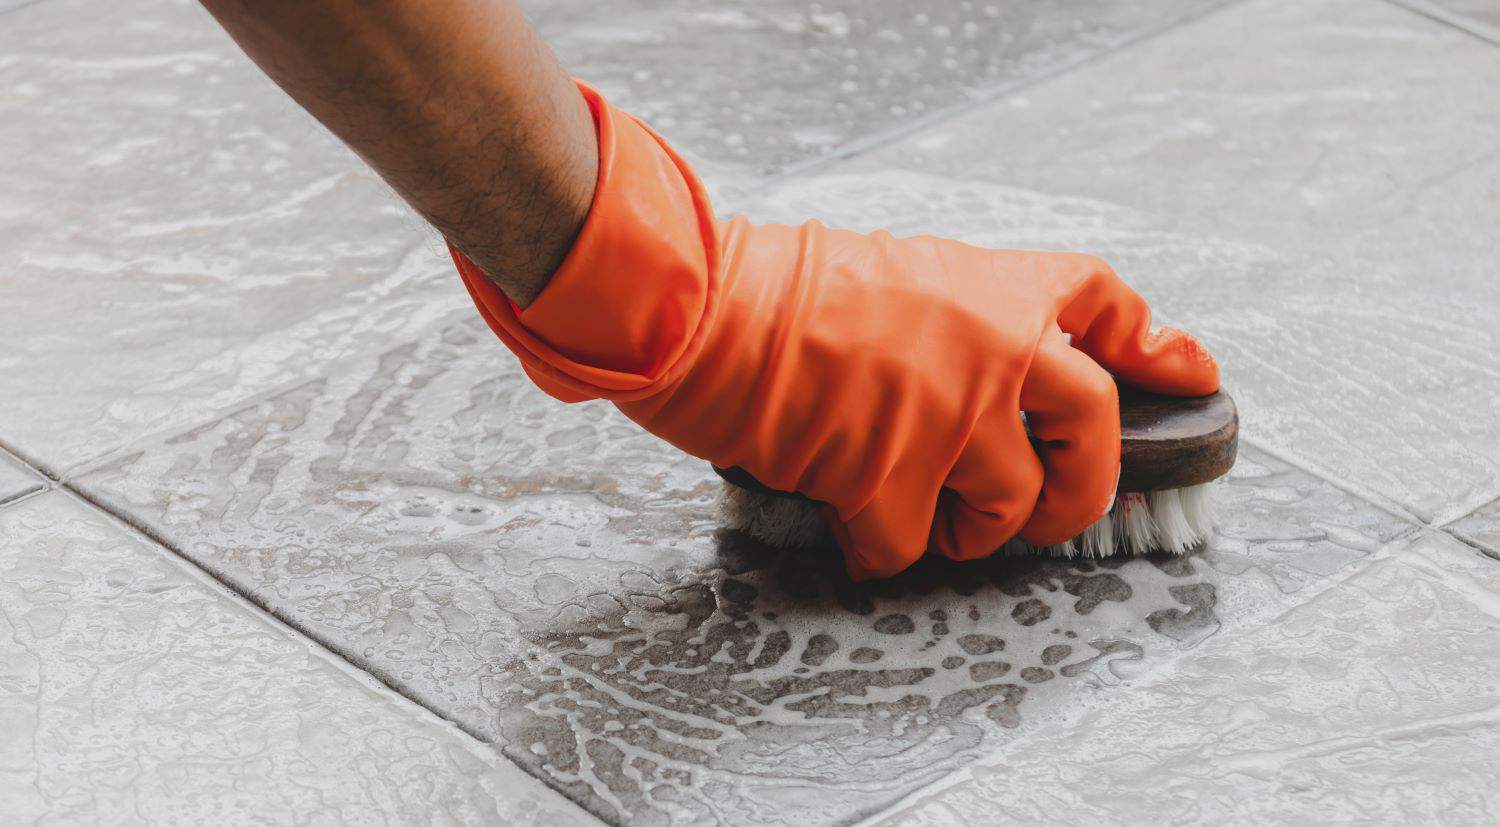 Best Homemade Grout Cleaner and Other Tile Floor Cleaning Tips